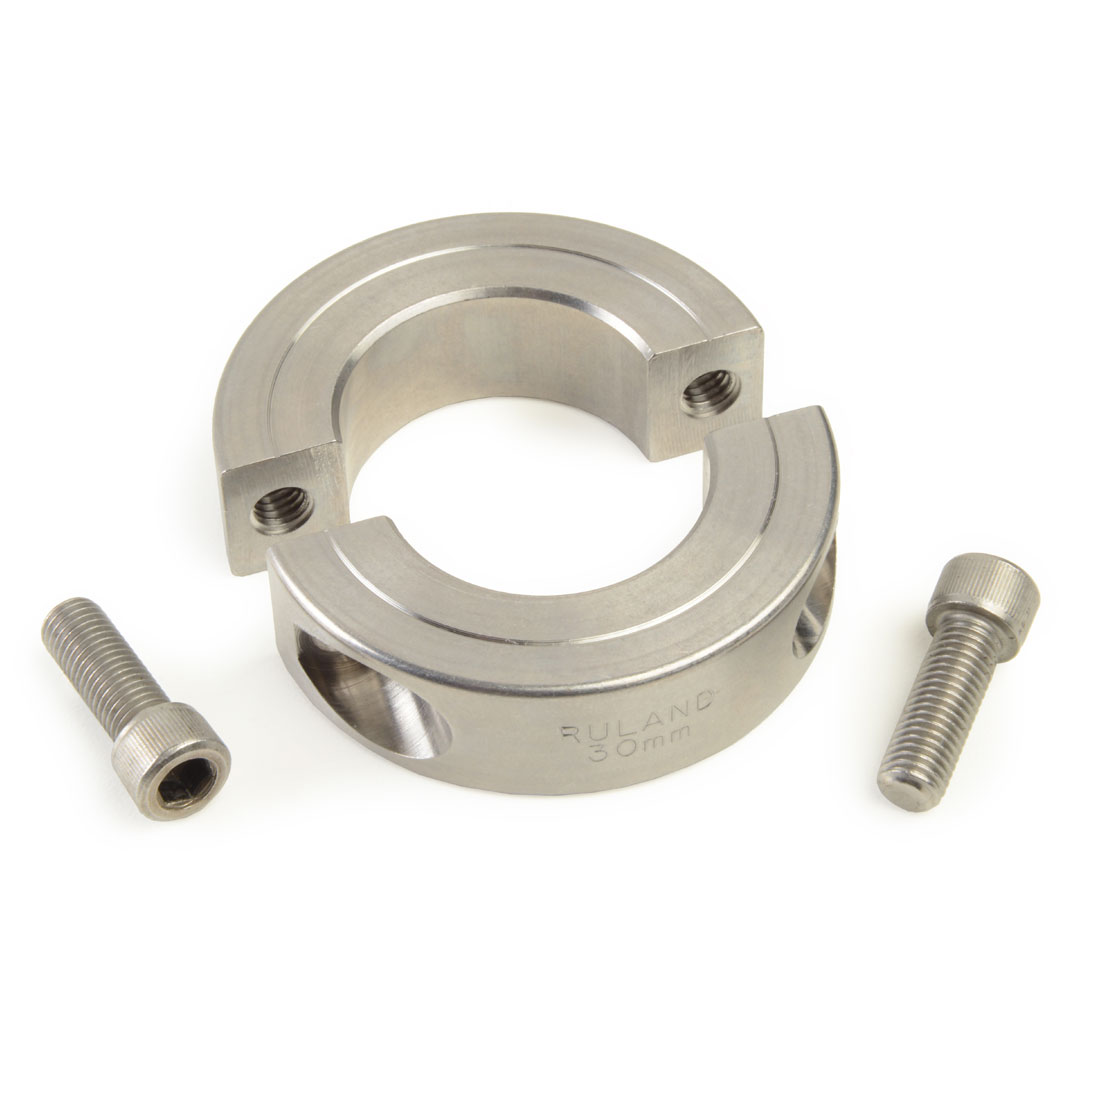 Clamp Collar Style Standard Dimension Type Stainless Steel Shaft Collar - 1 Each 1 Bore Dia 